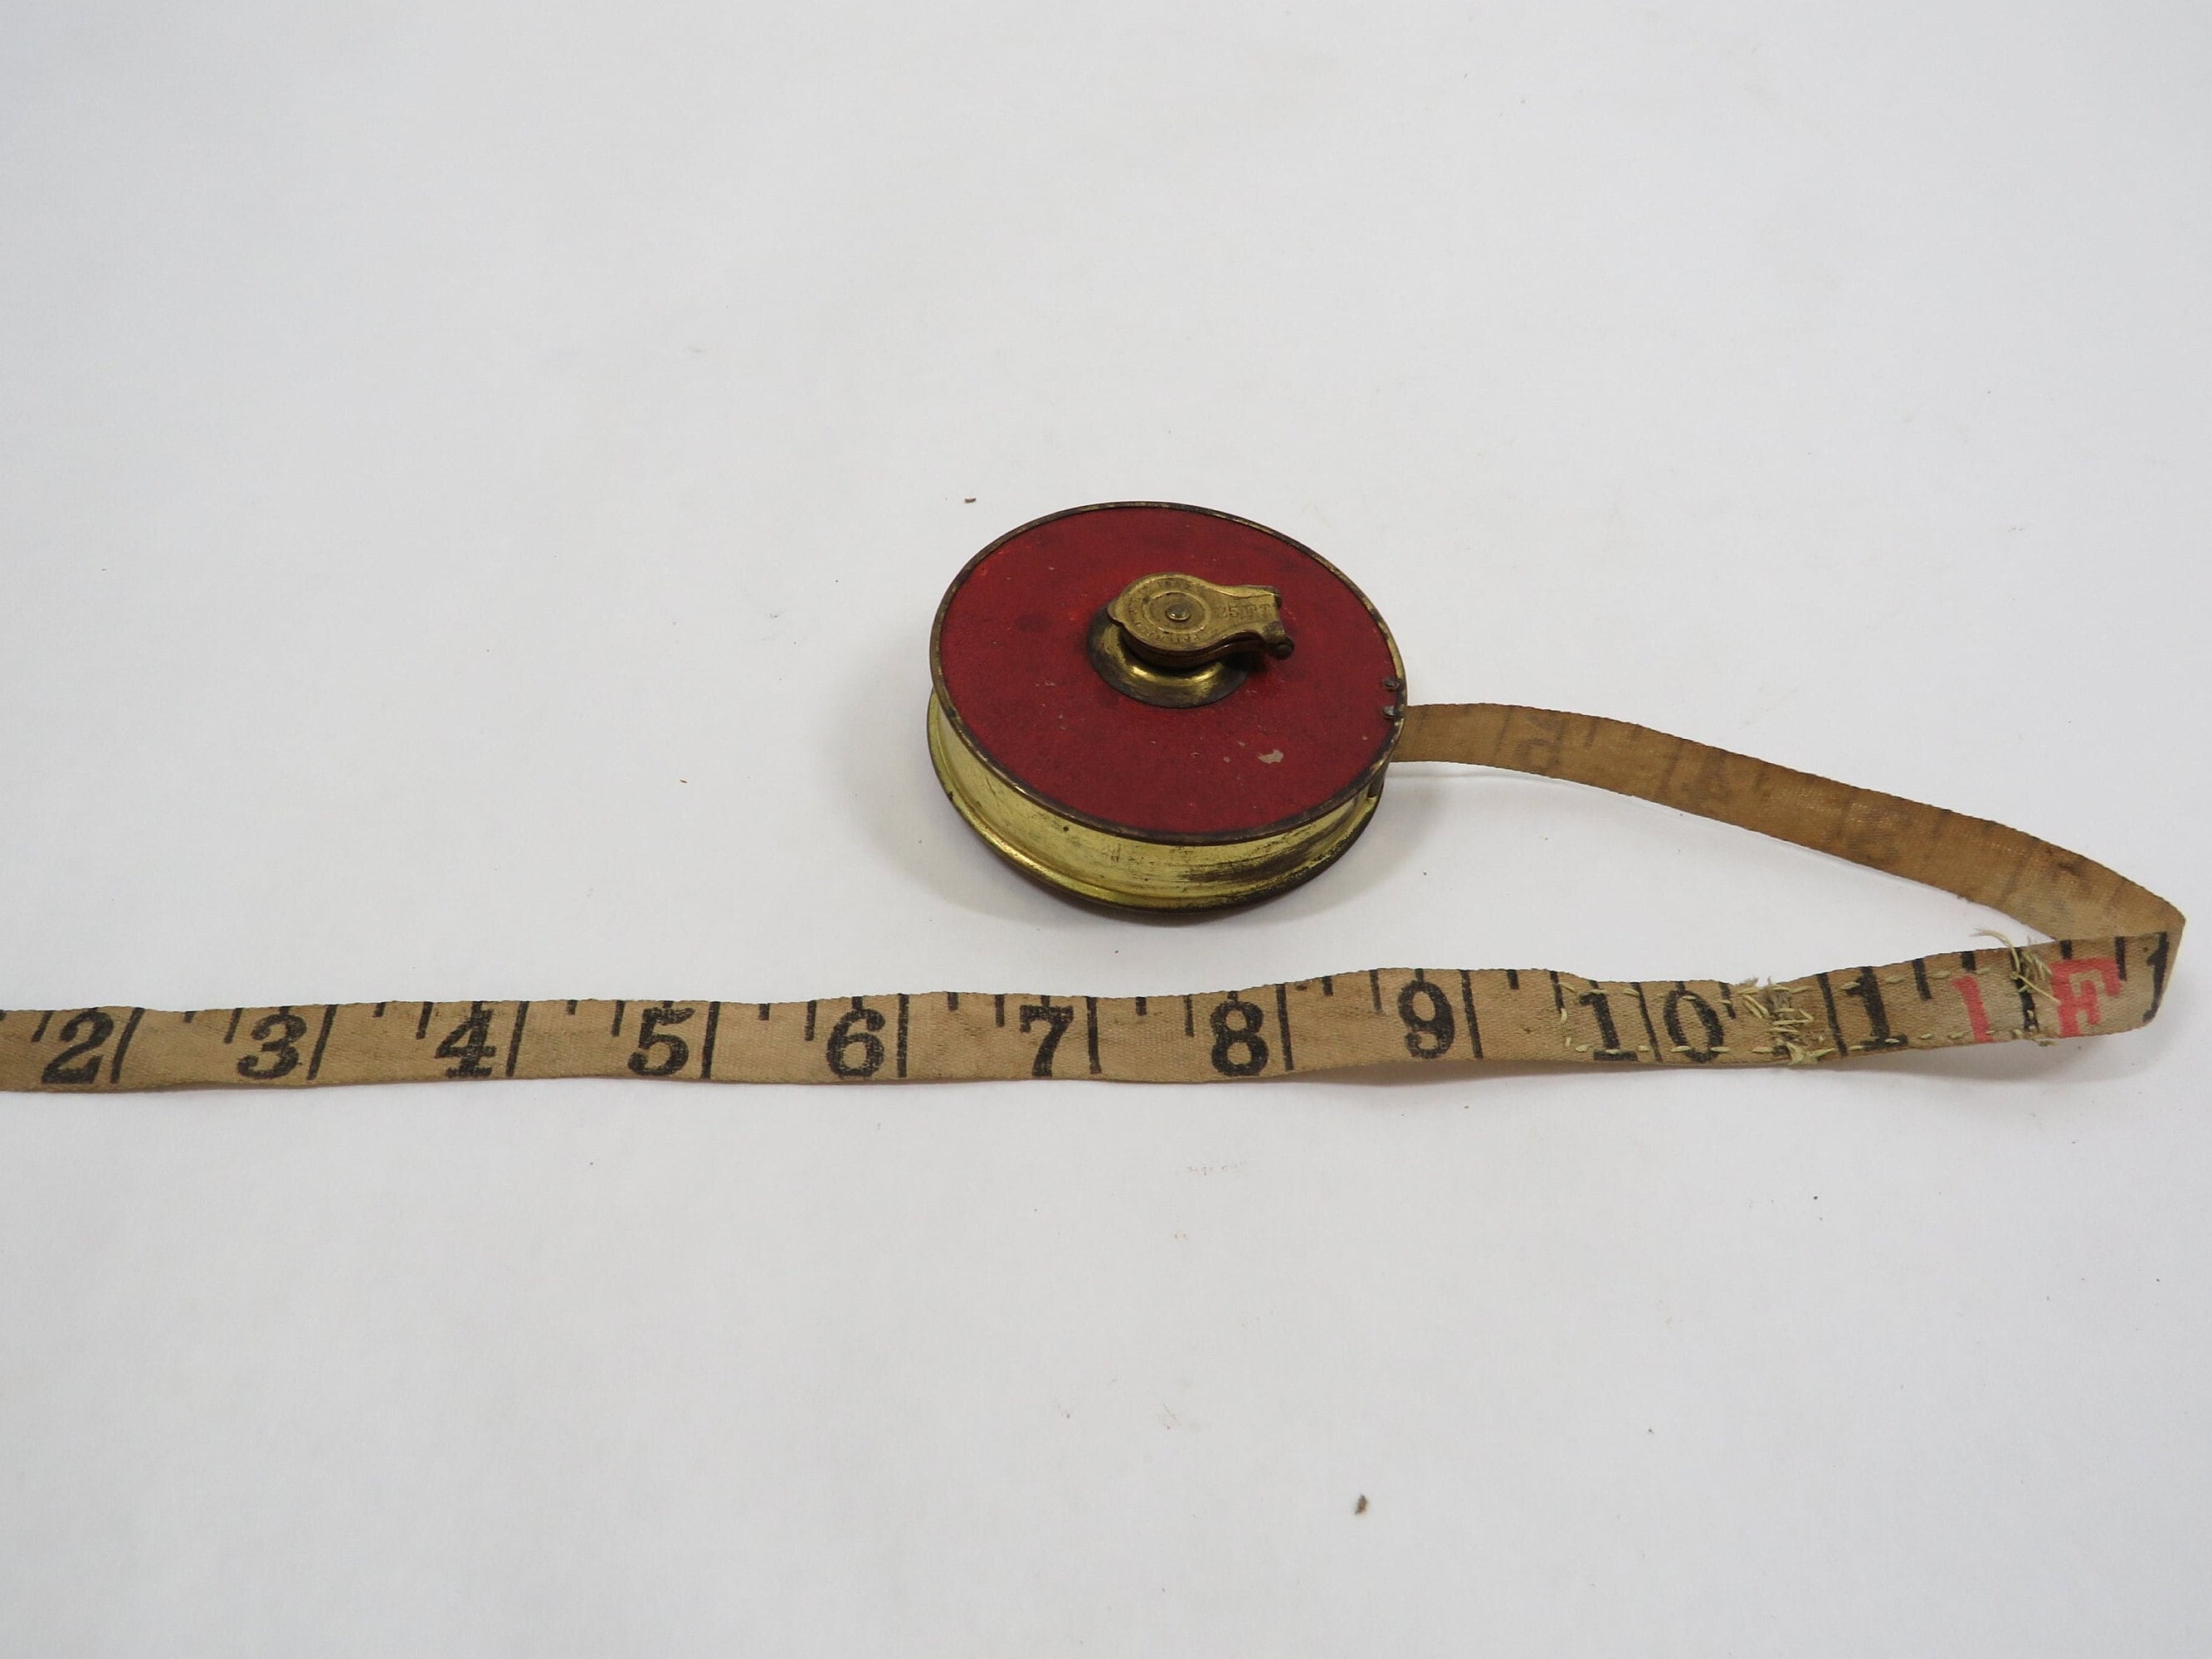 Adorable Tape Measure designed to look like a chameleon with an